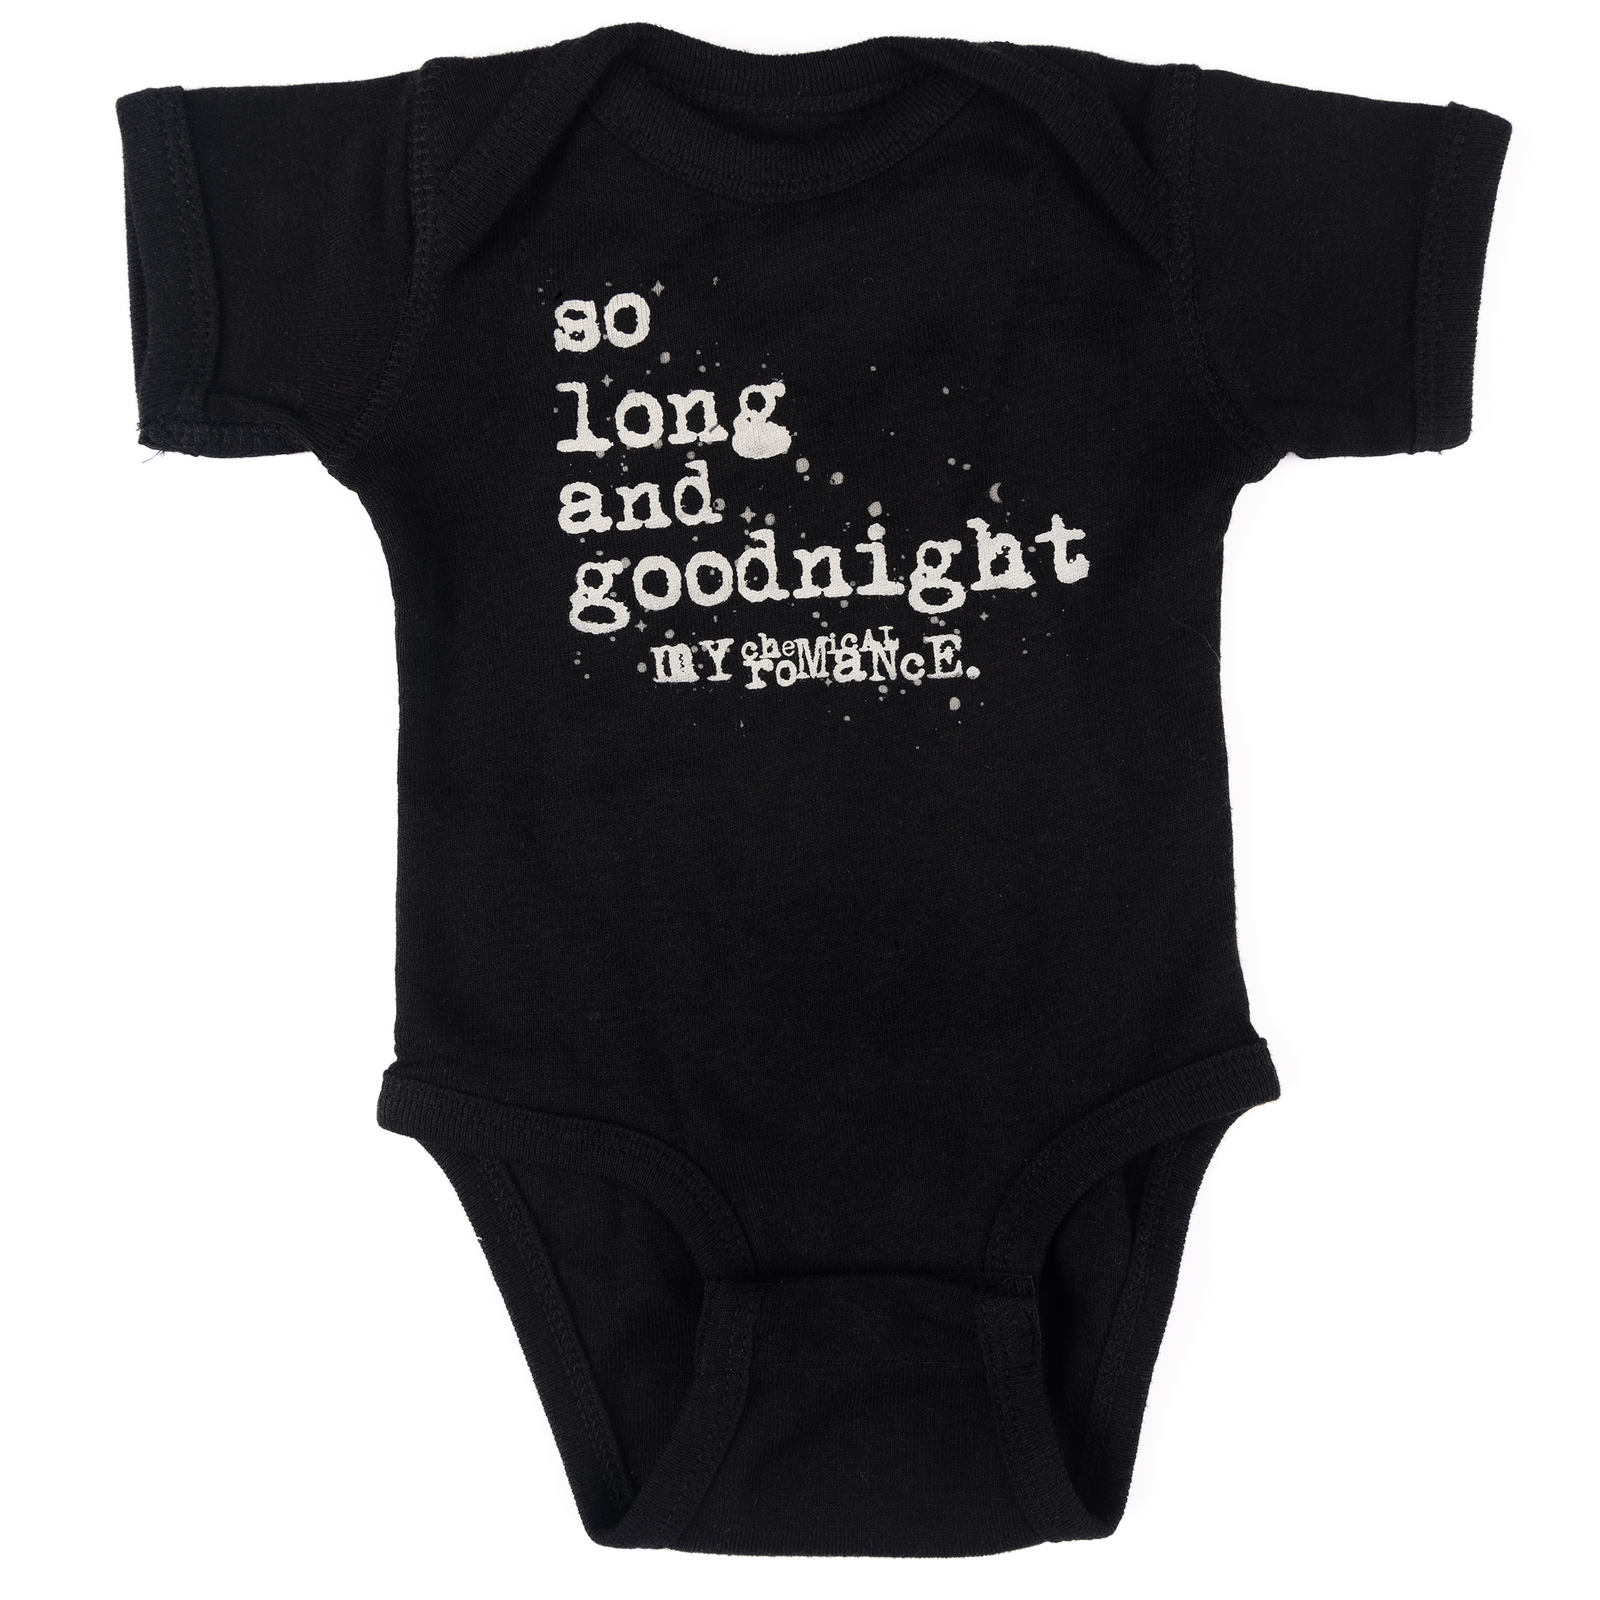 My Chemical Romance "So Long and Goodnight" Onesie